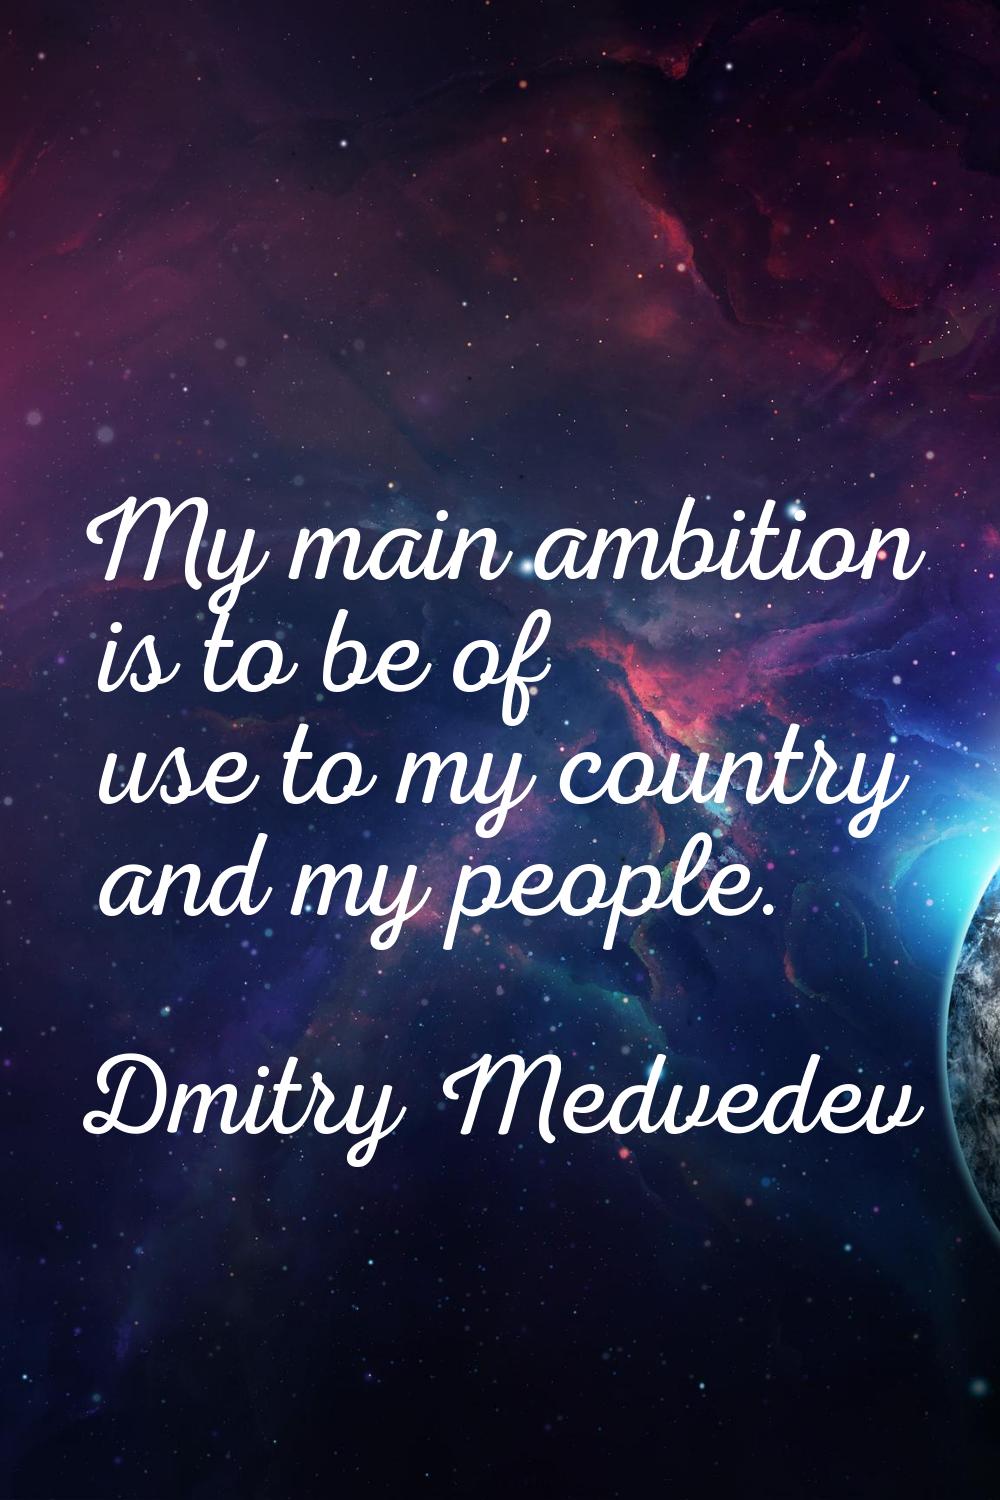 My main ambition is to be of use to my country and my people.